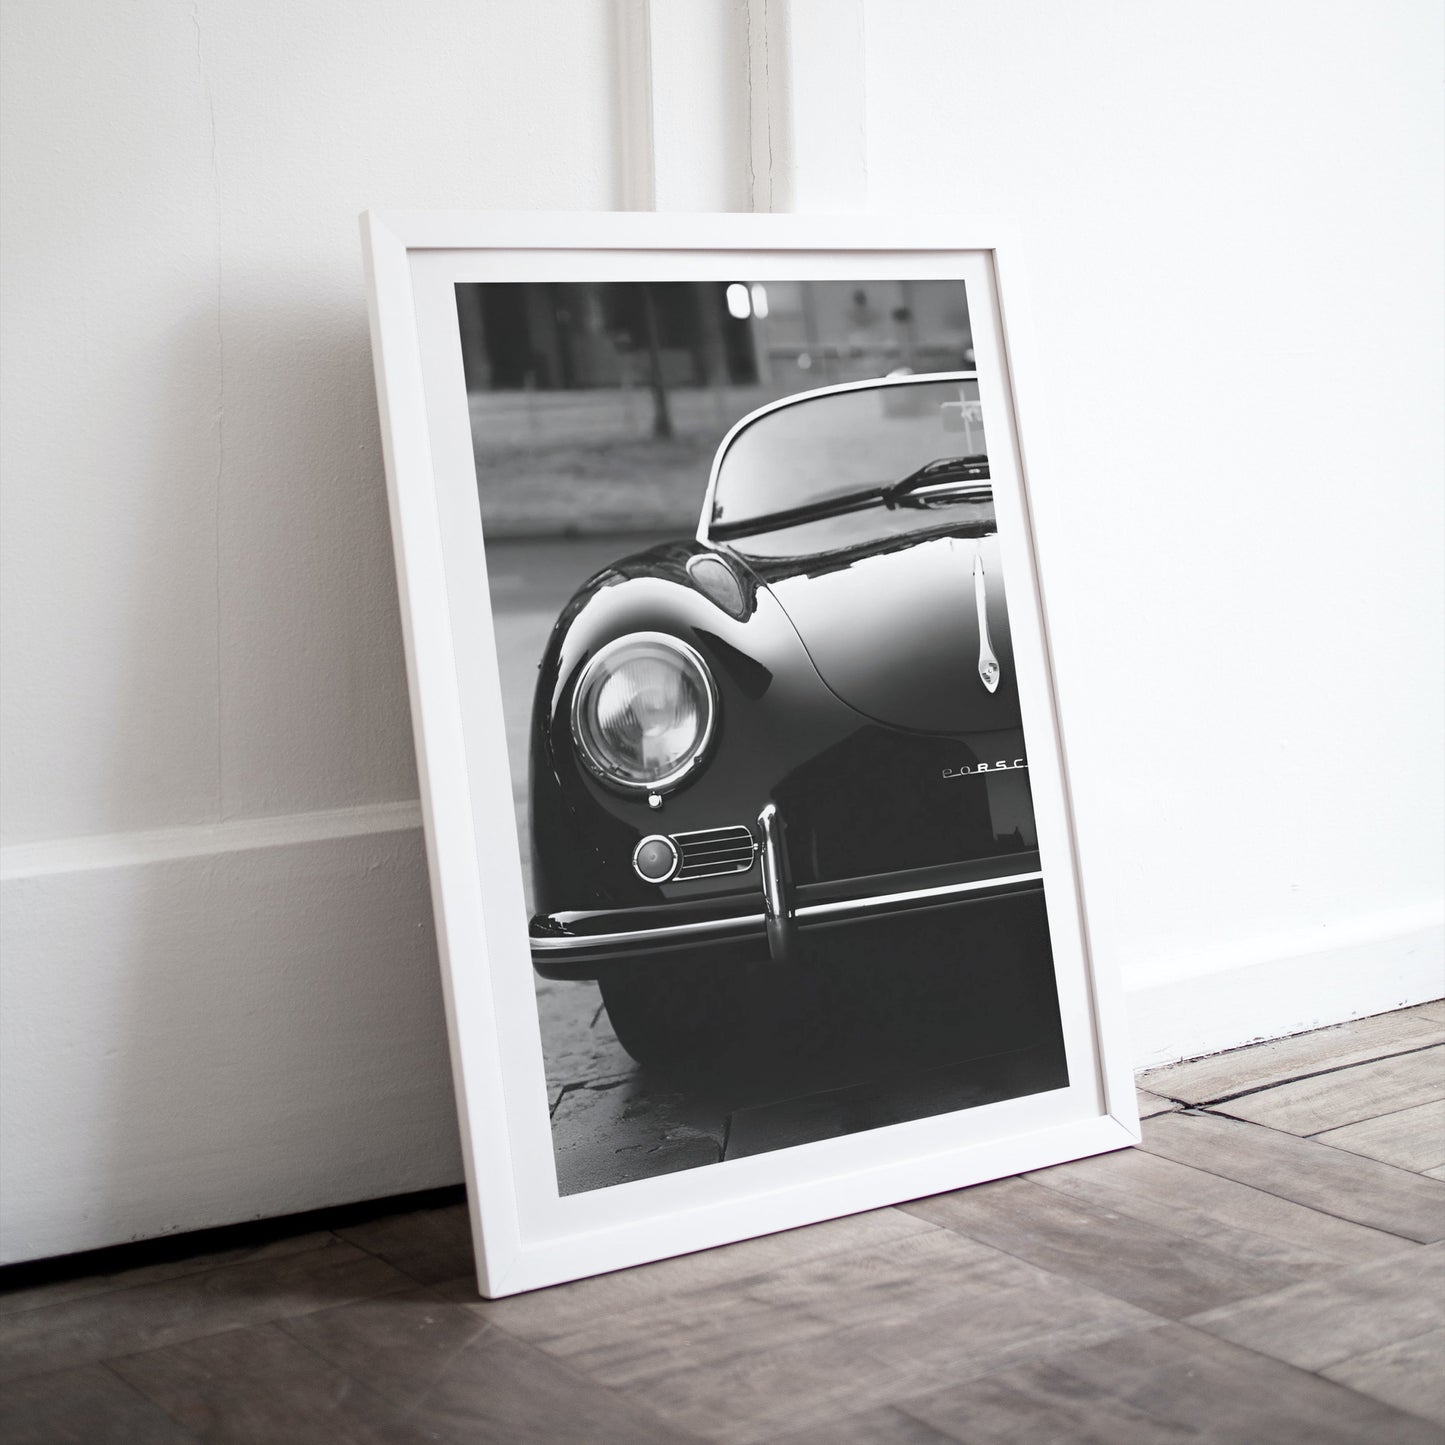 Black & white Luxury Vintage Car Print INSTANT DOWNLOAD, Classic Car Poster, Car Photography, Retro Wall Decor, Old Car Picture, Glamour Art